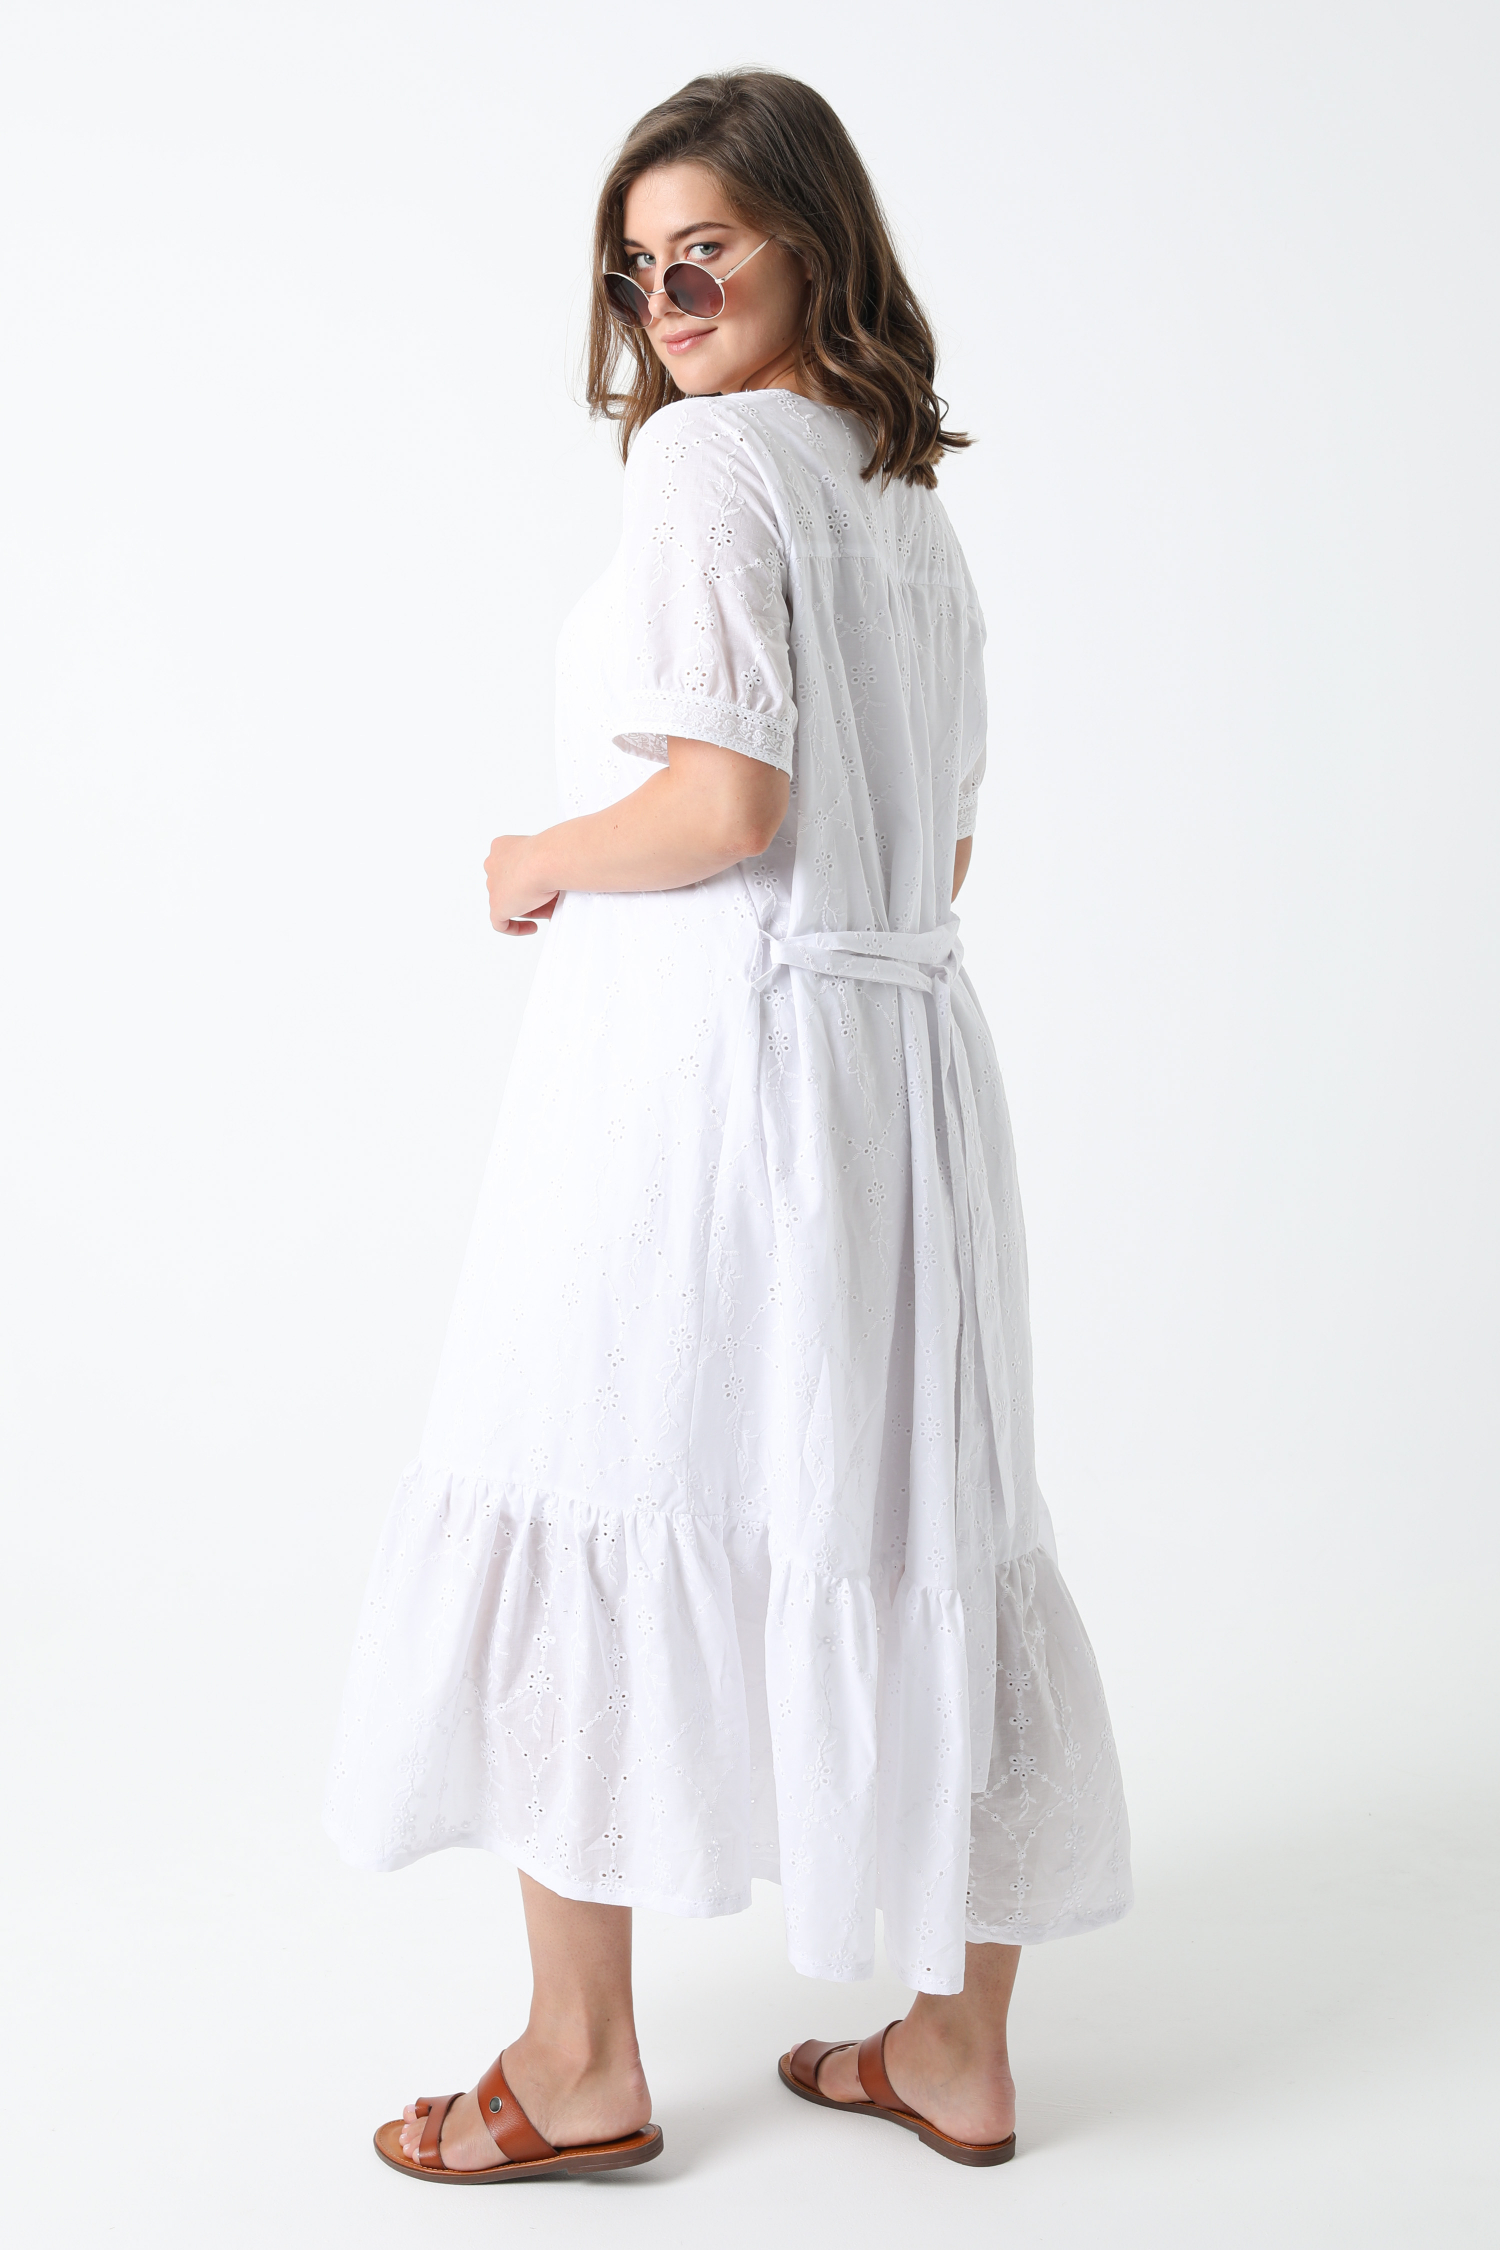 English embroidery square neck dress (Shipping June 10/15)